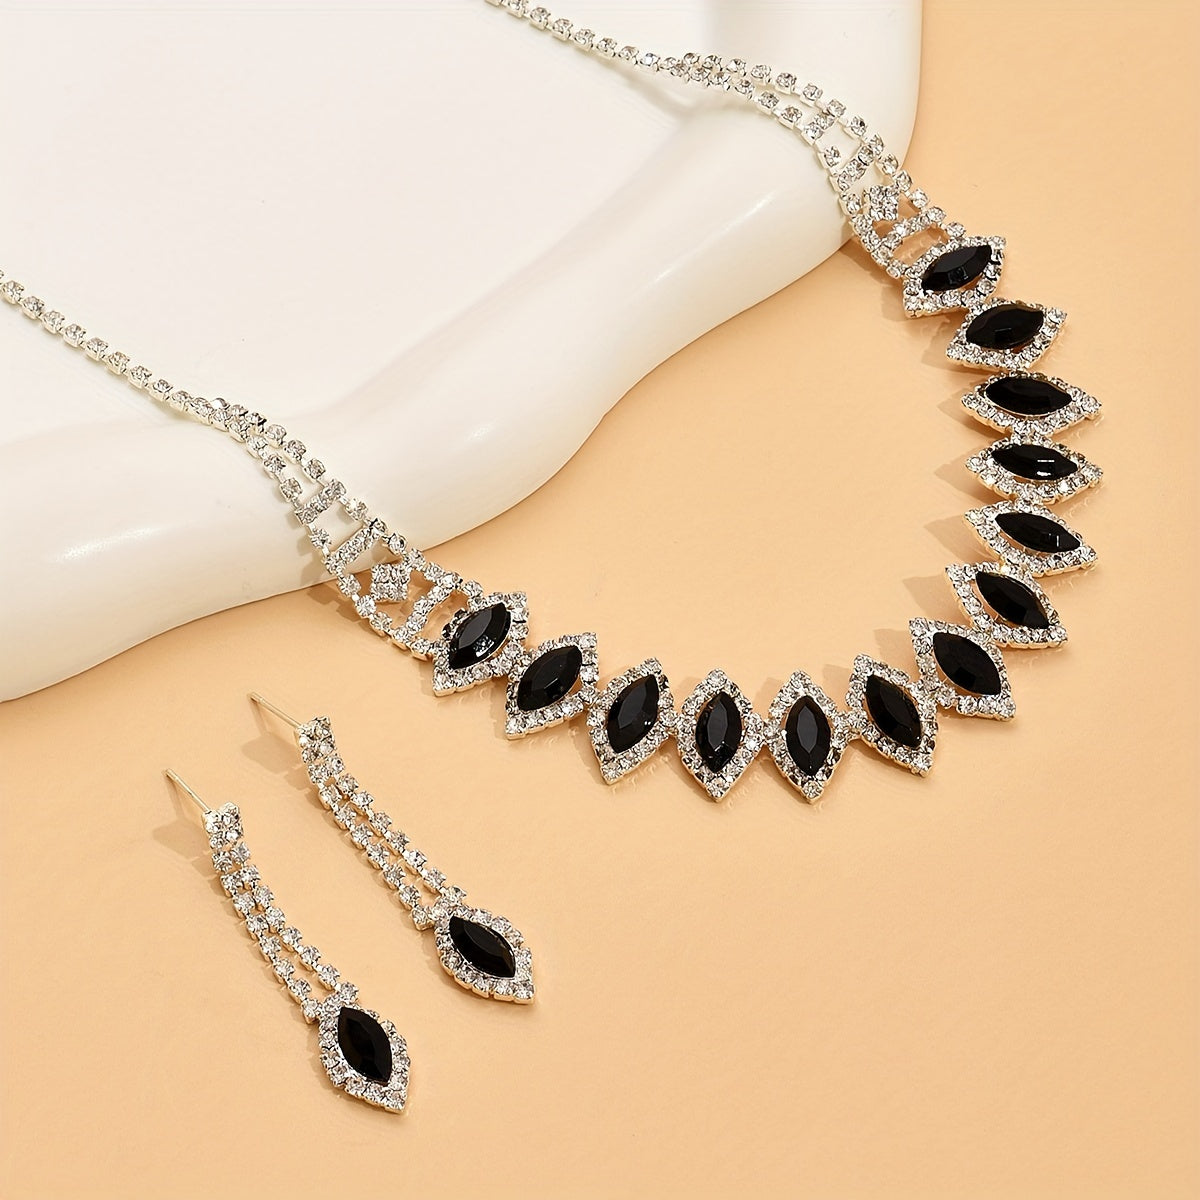 Glittering Mexican Style Women's Jewelry Set - Silver Plated Necklace and Earrings for Parties, Banquets, and Weddings